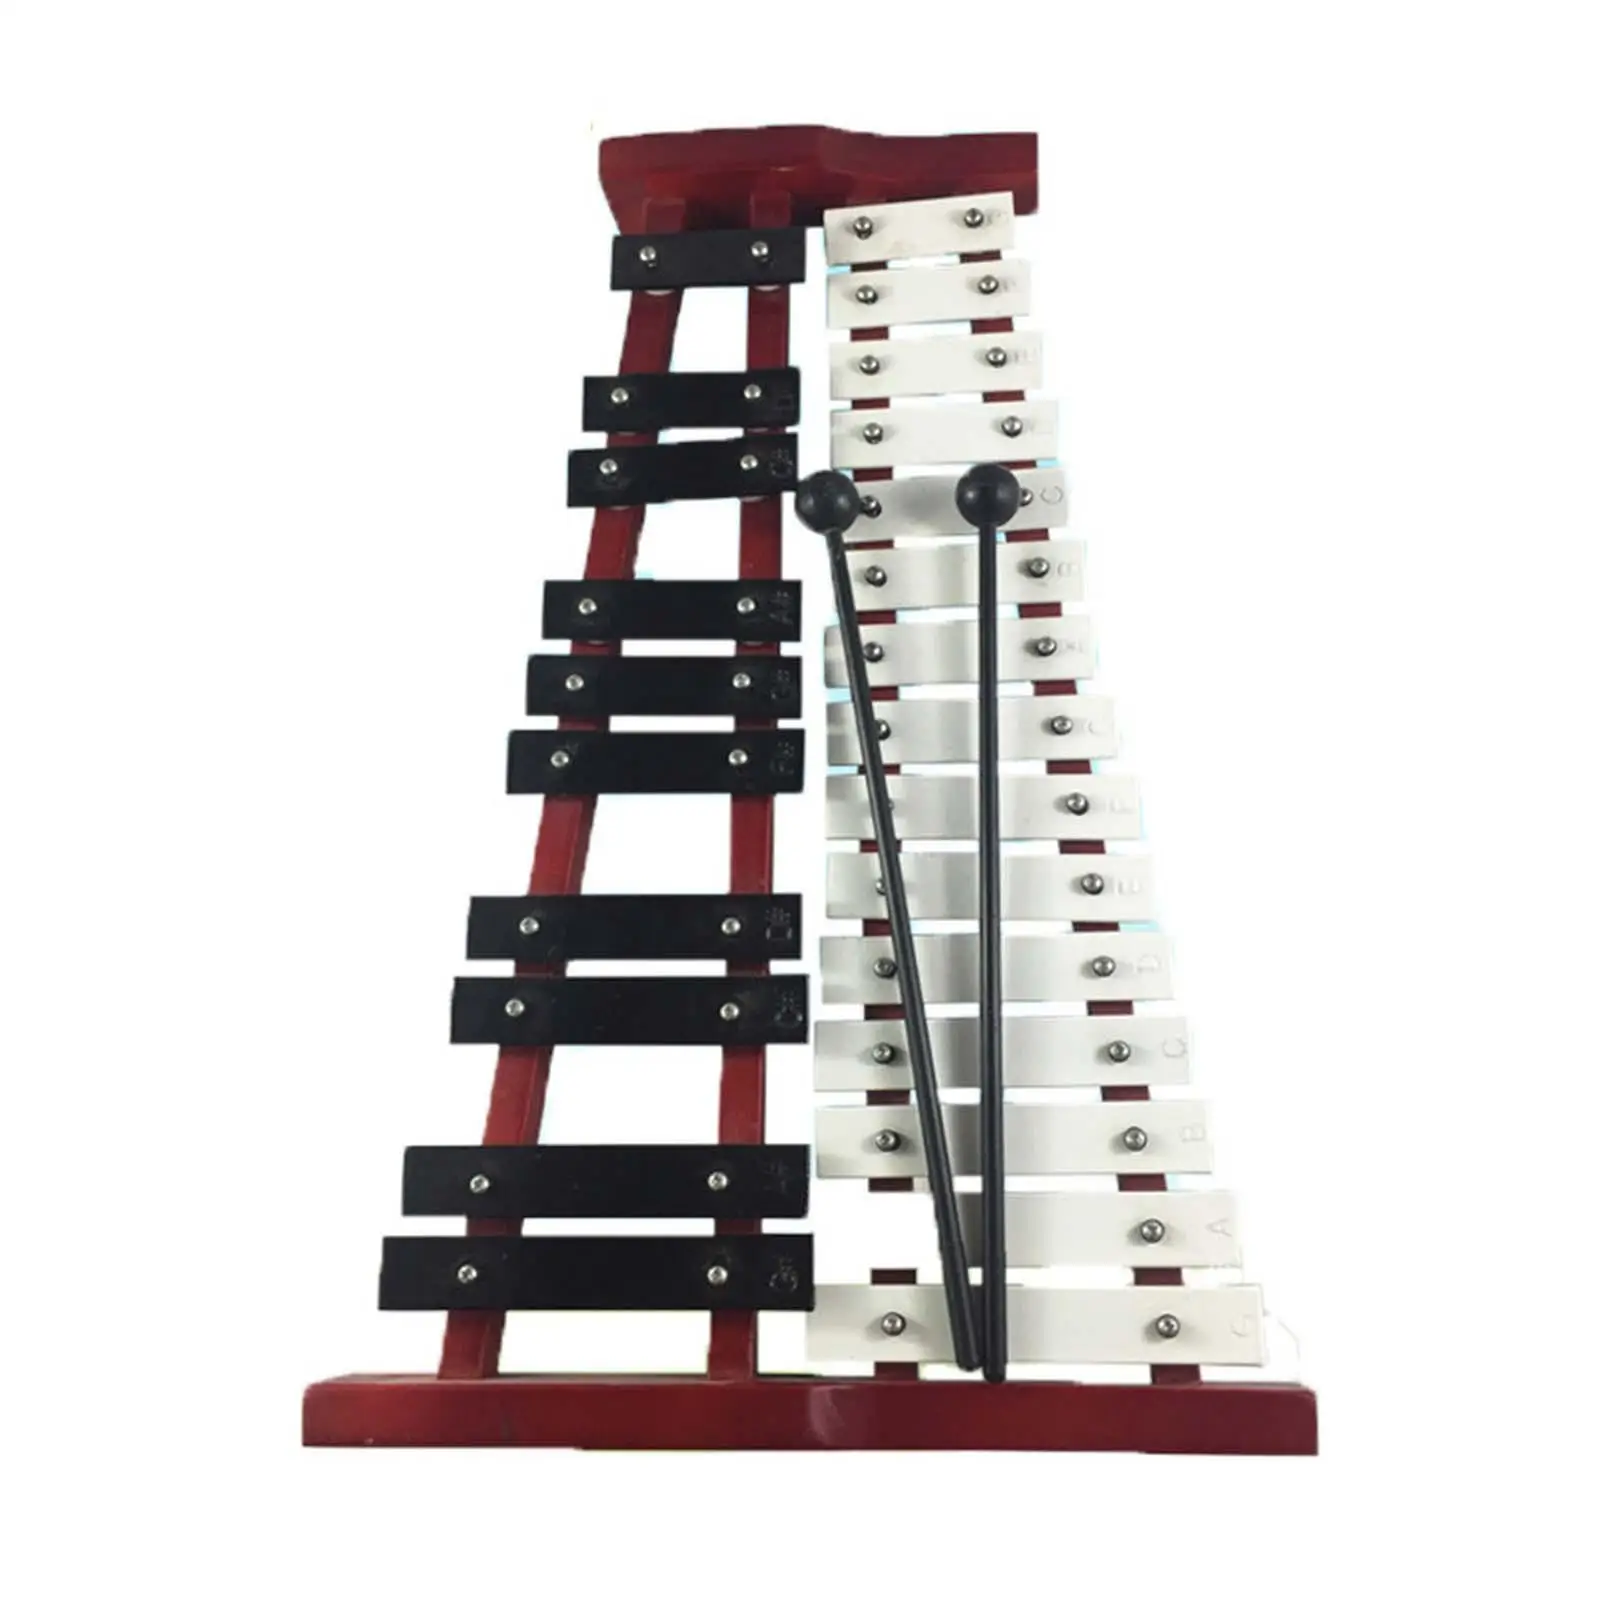 25 Note Glockenspiel Xylophone Compact Size 40x25x8cm Easily Carry Educational Percussion